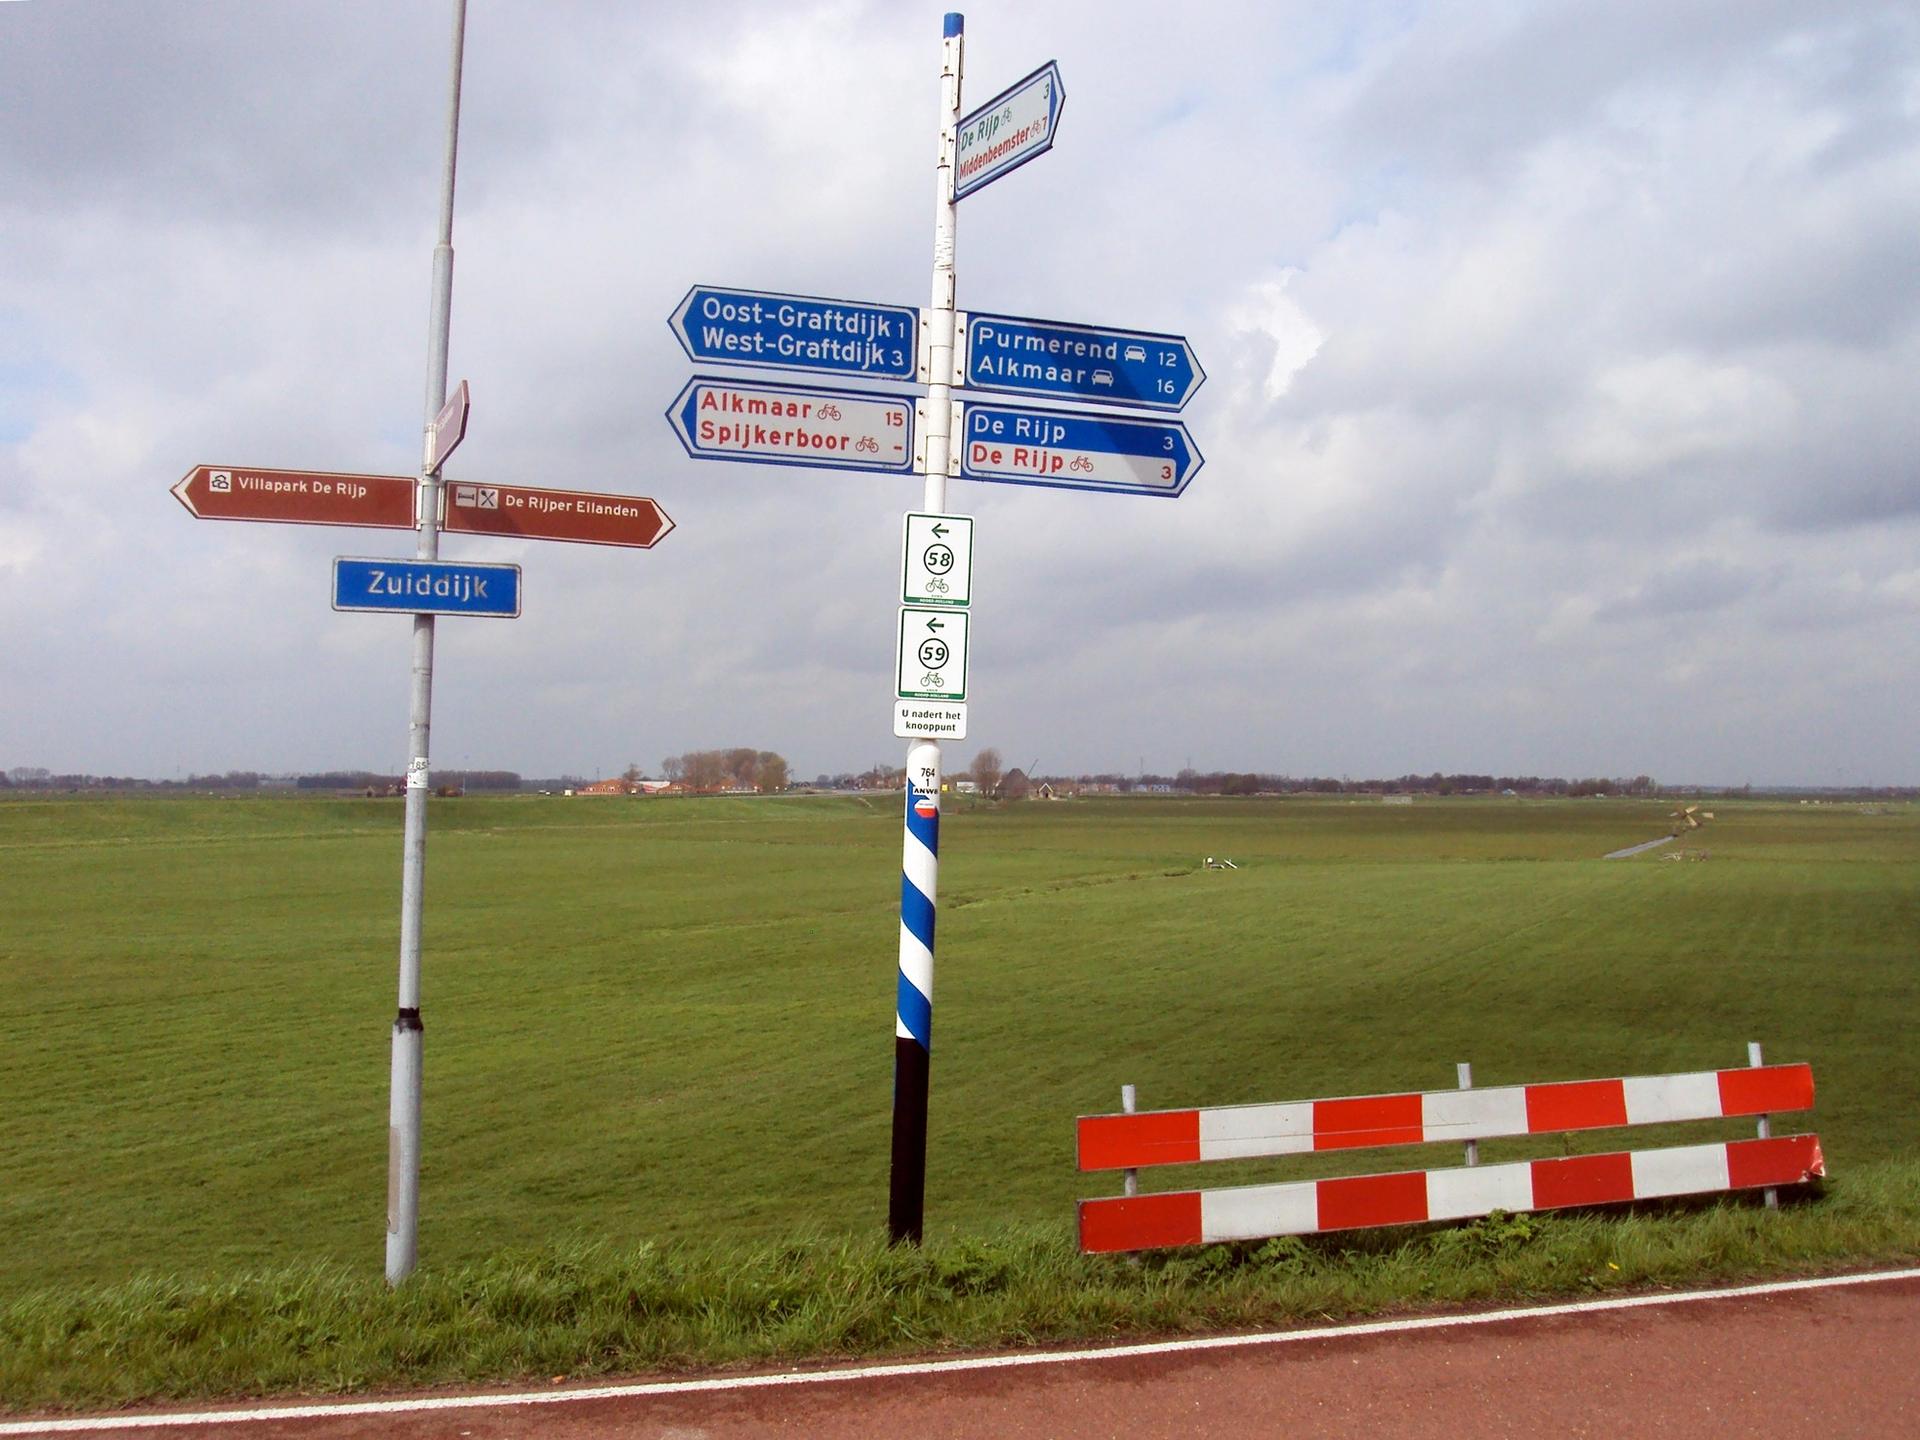 Known unknown: the terra incognita of the Dutch countryside is extremely well signposted...